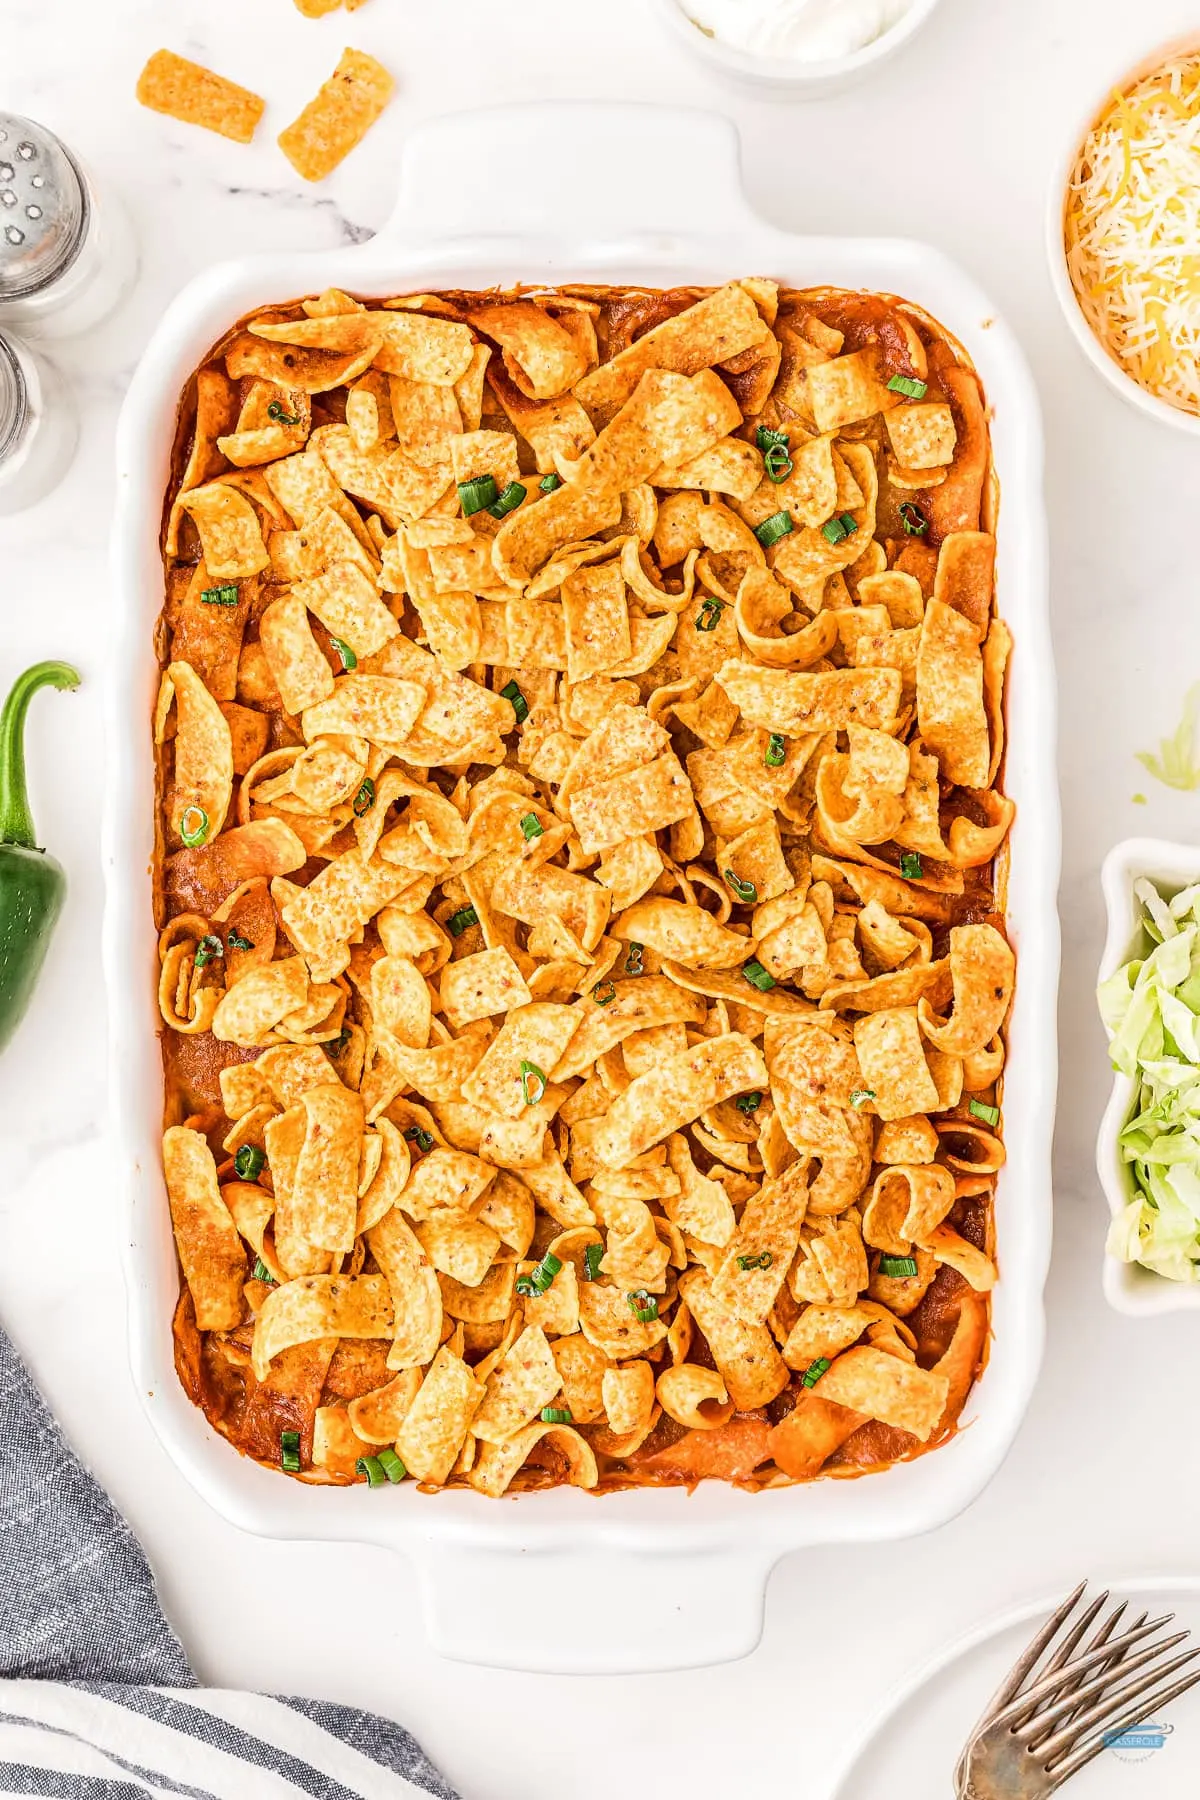 baked frito pie casserole in a white casserole dish with shredded lettuce